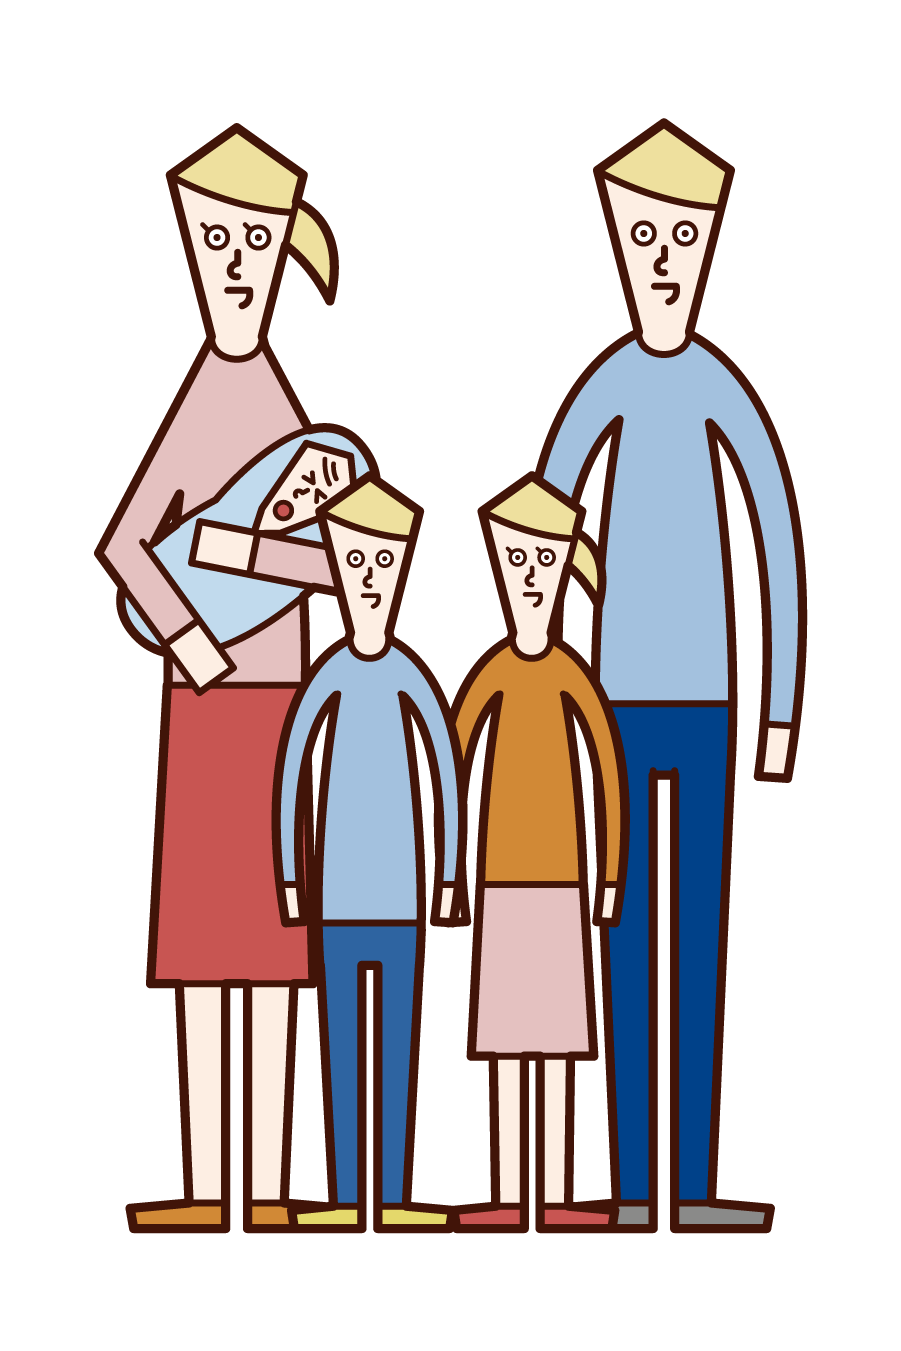 Illustration of a family of five